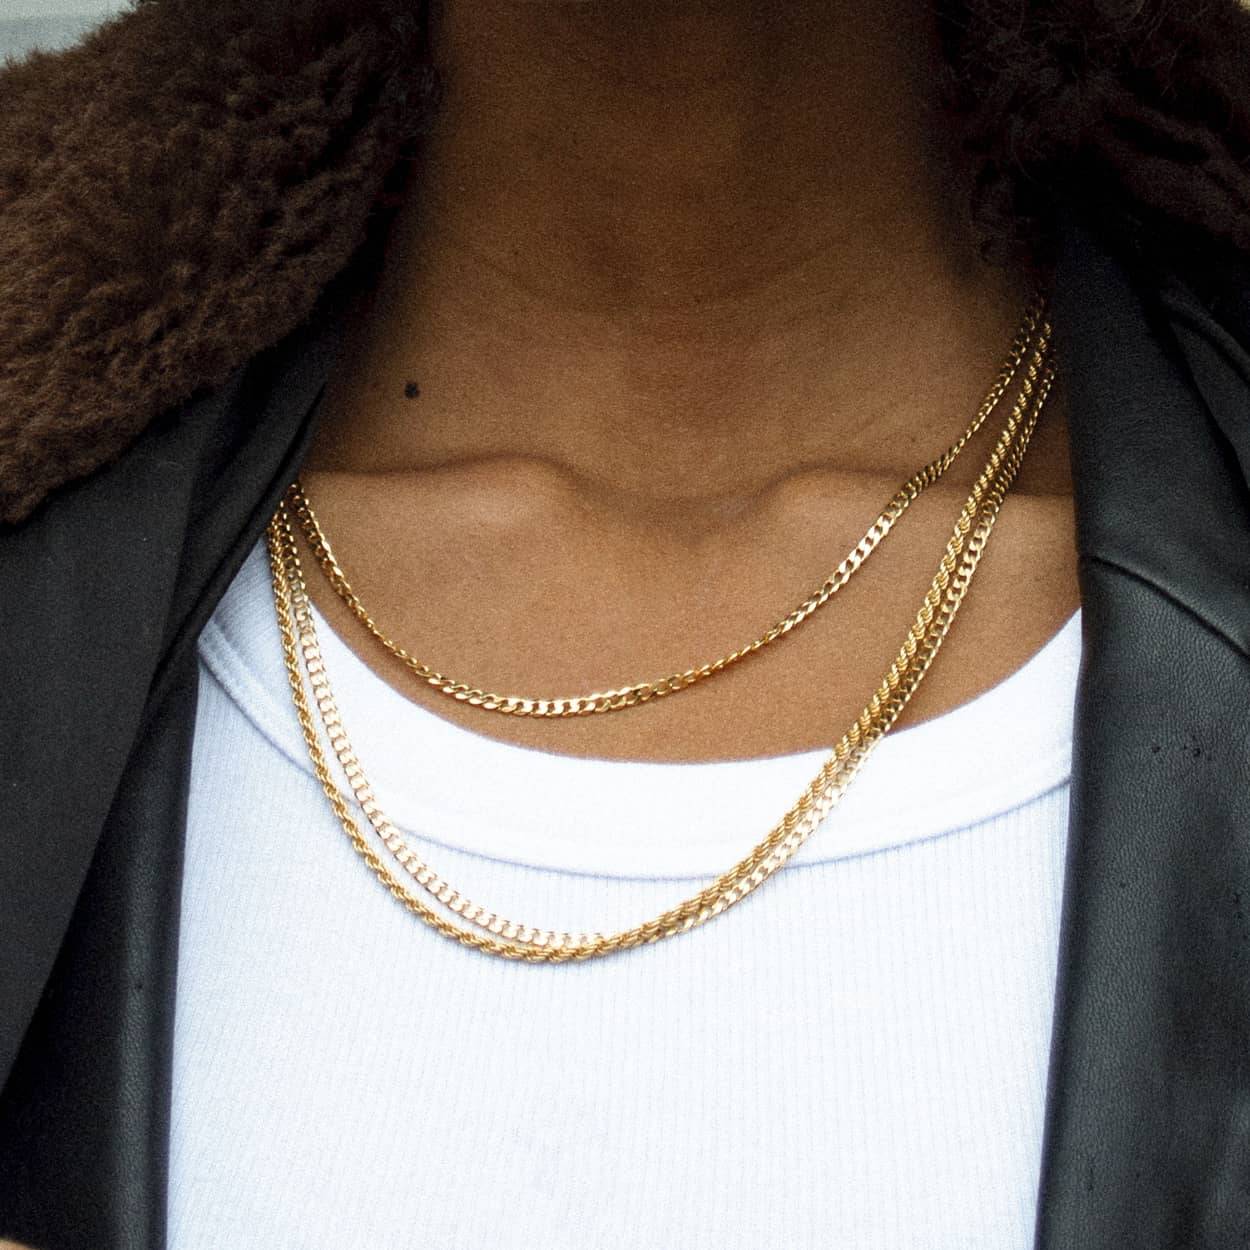 The Cuban Chain is an elegant and unisex piece of jewelry, crafted in Italy and made of 925 Sterling Silver with a high-quality 18 karat gold plating. Every jewelry is designed by Atelier Domingo's in France and is made to be worn by both men and women.